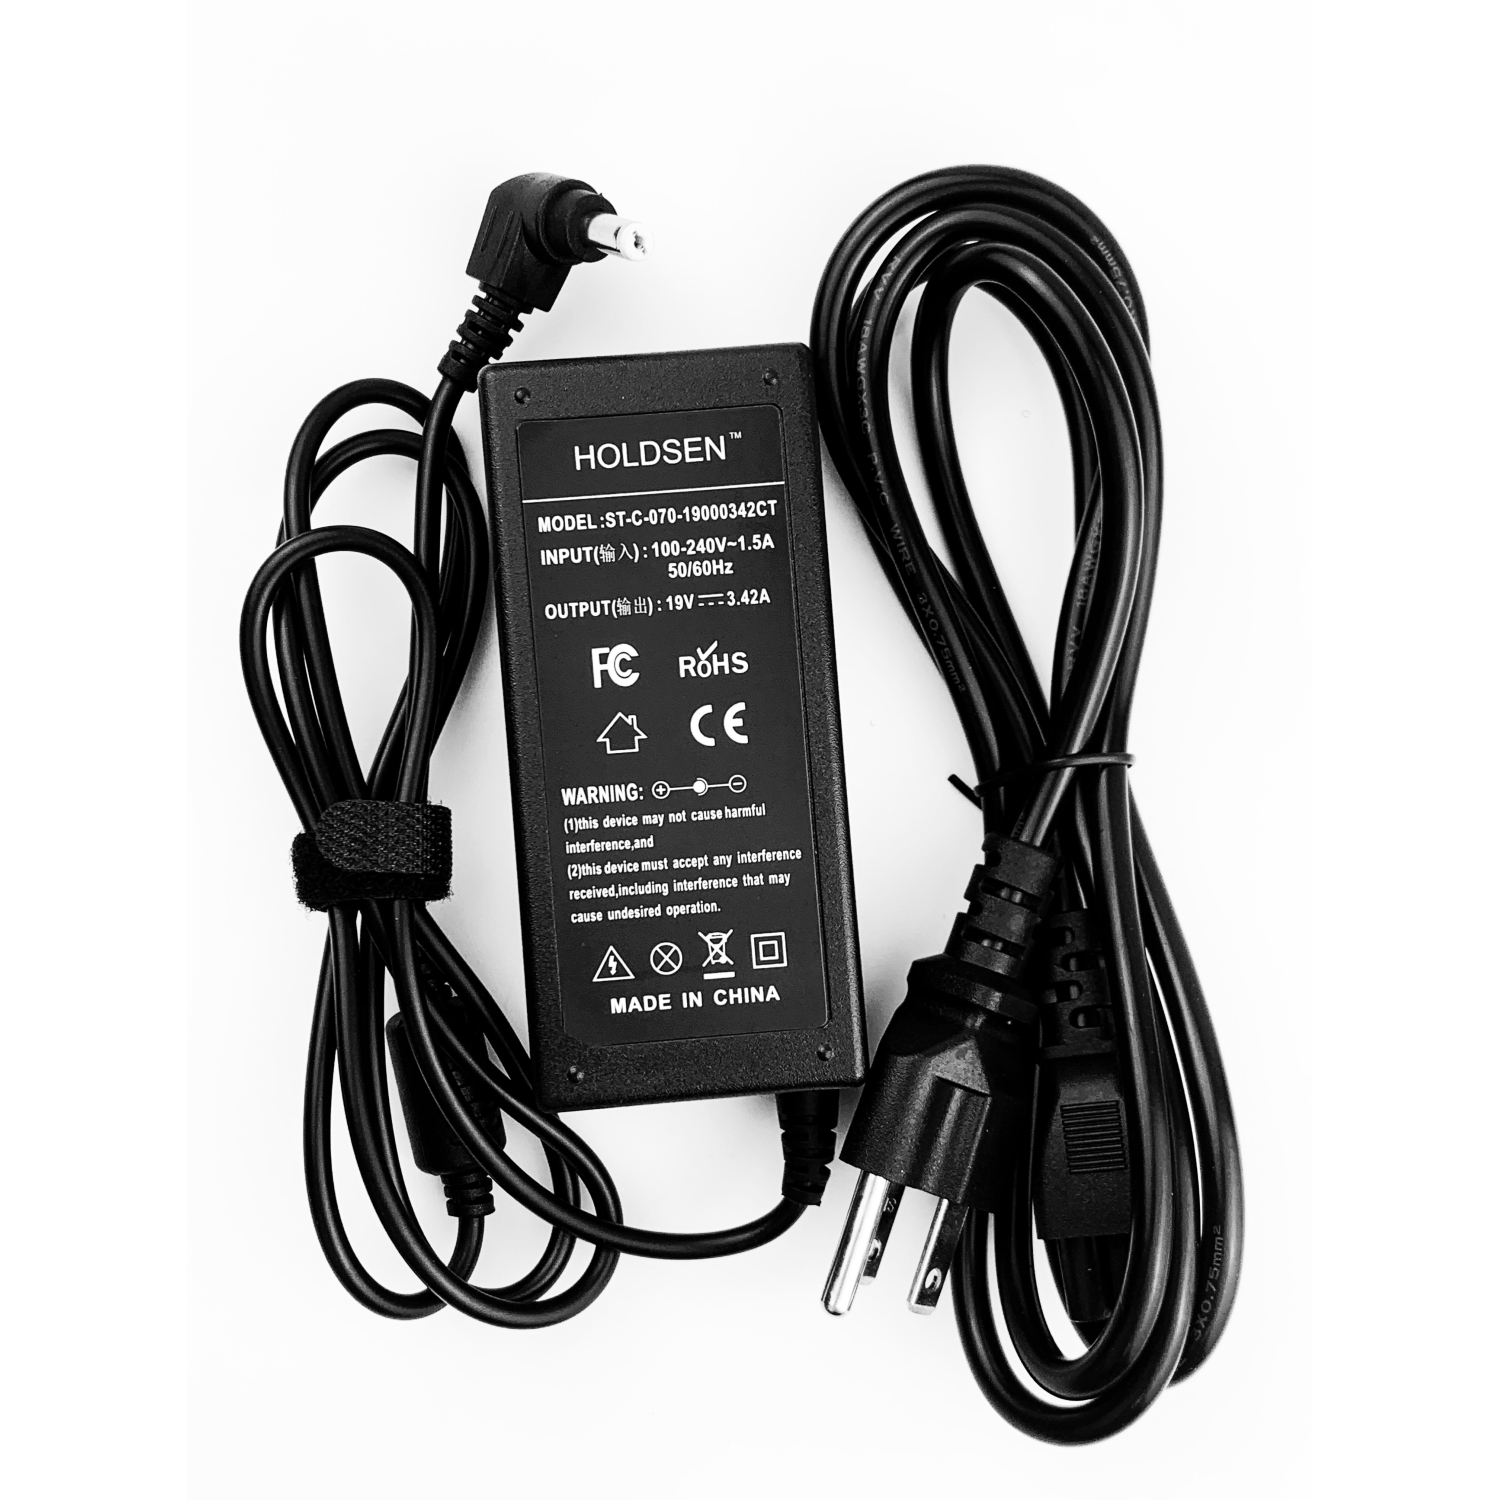 65W AC adapter charger cord for Acer Aspire 5 A515-52 A515-52g A515-51-3509 ONLY, NOT FOR other models!